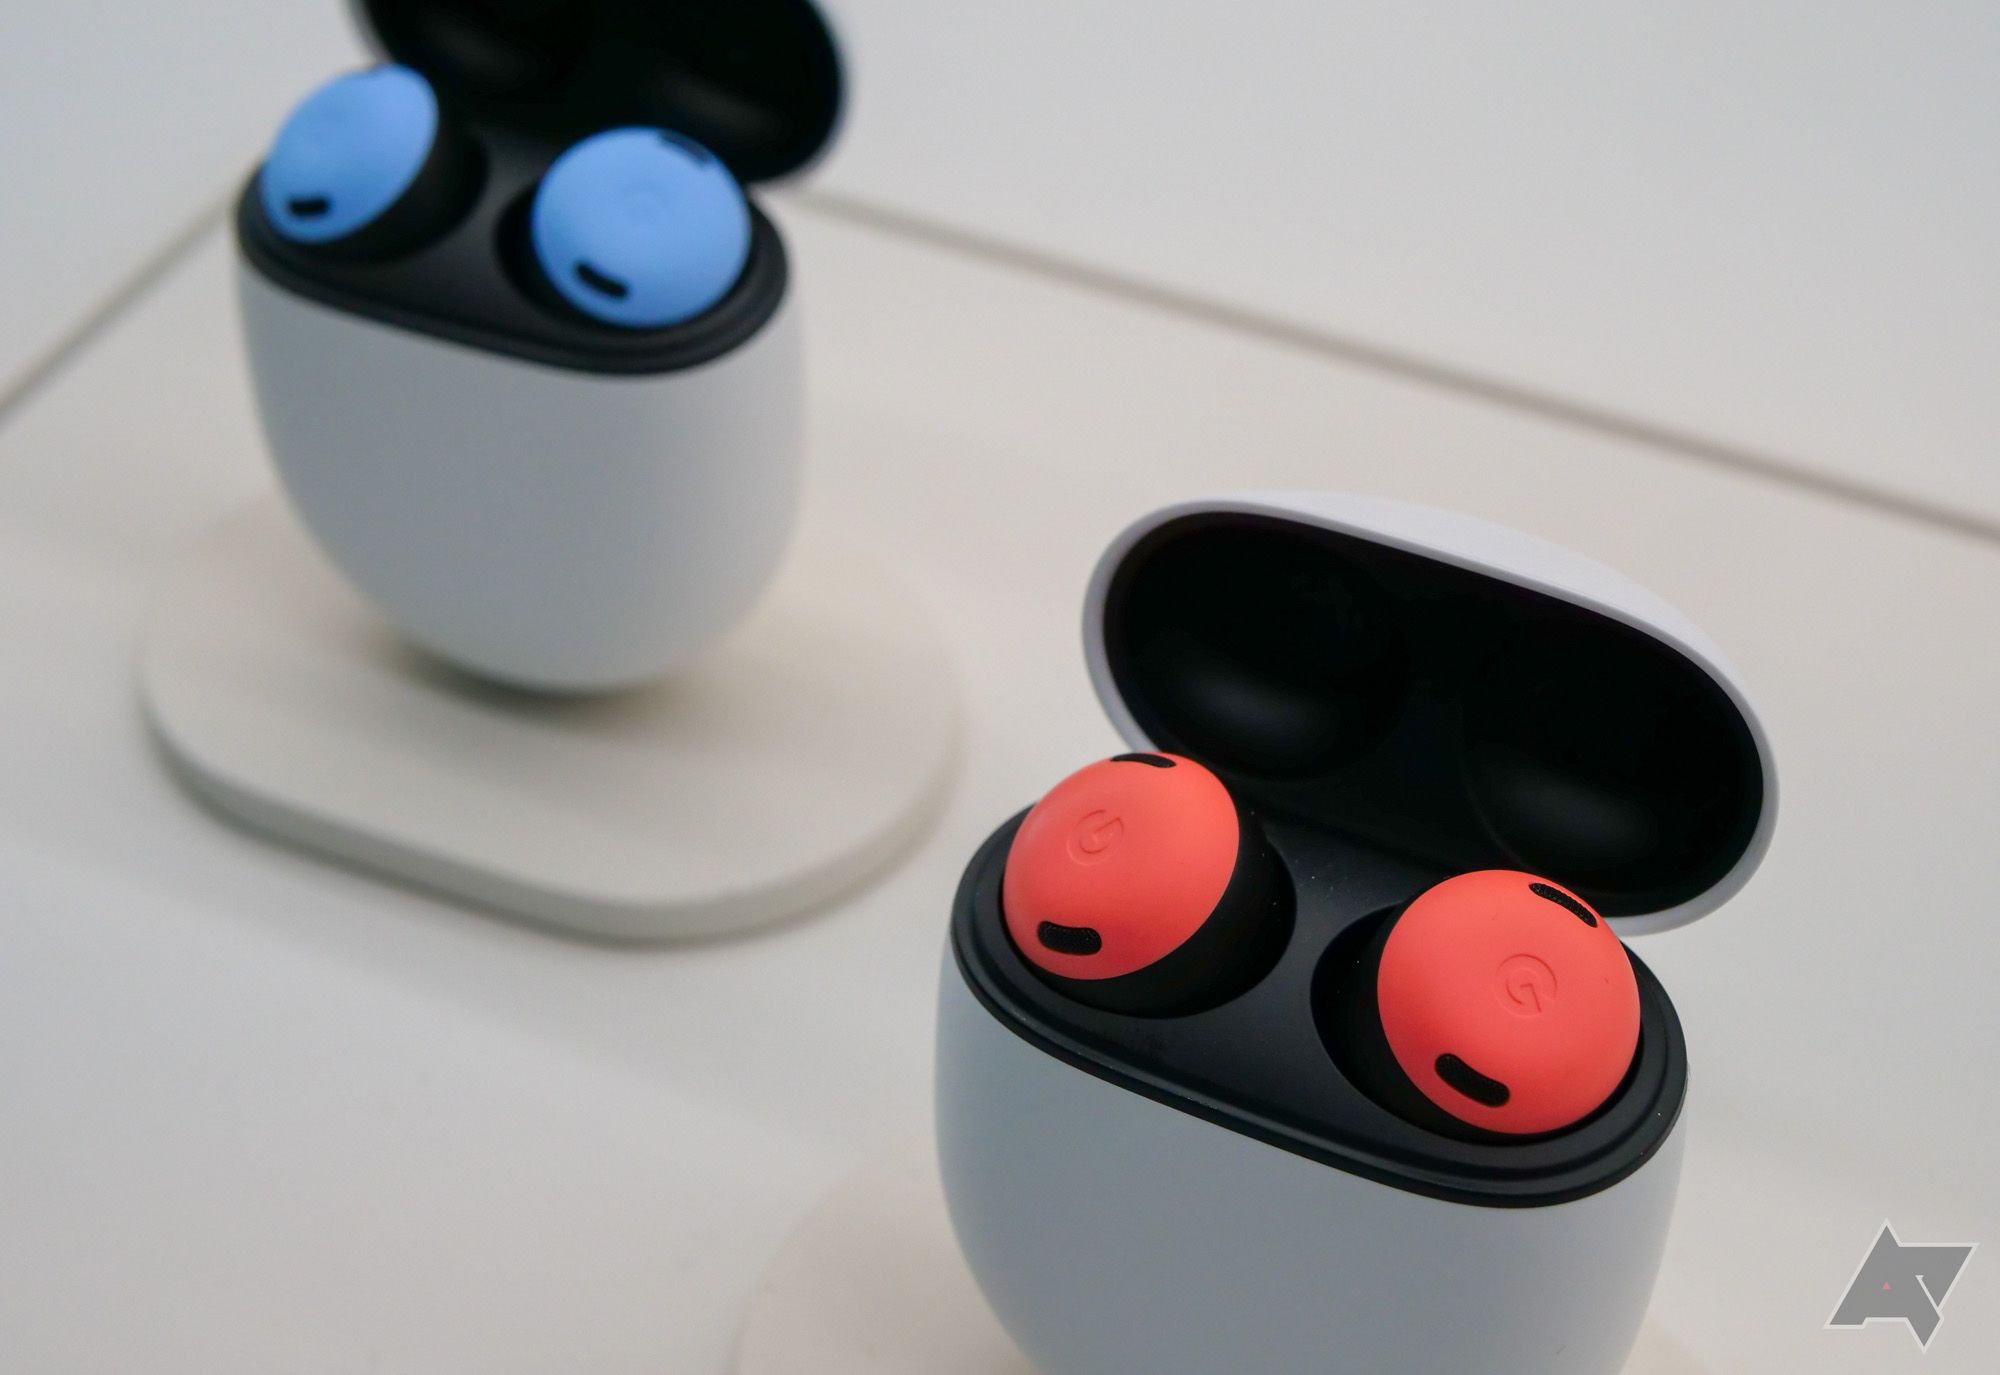 This certification listing with a 650mAh battery could be Google's next earbuds